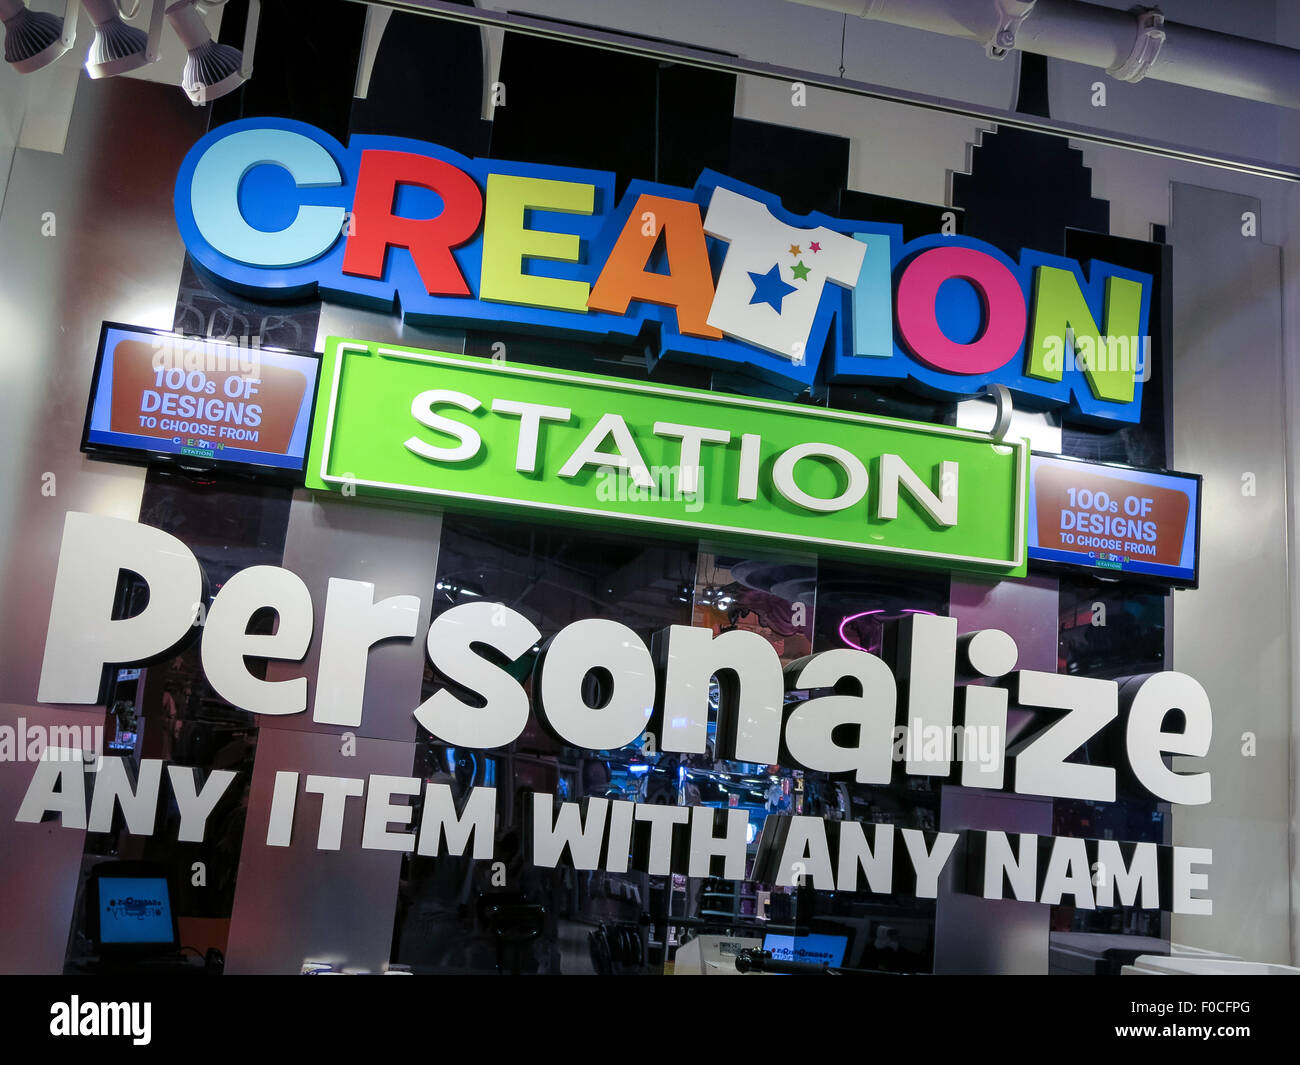 Personalize  Your Merchandise Station, Section Inside Toys R Us, Times Square, NYC Stock Photo